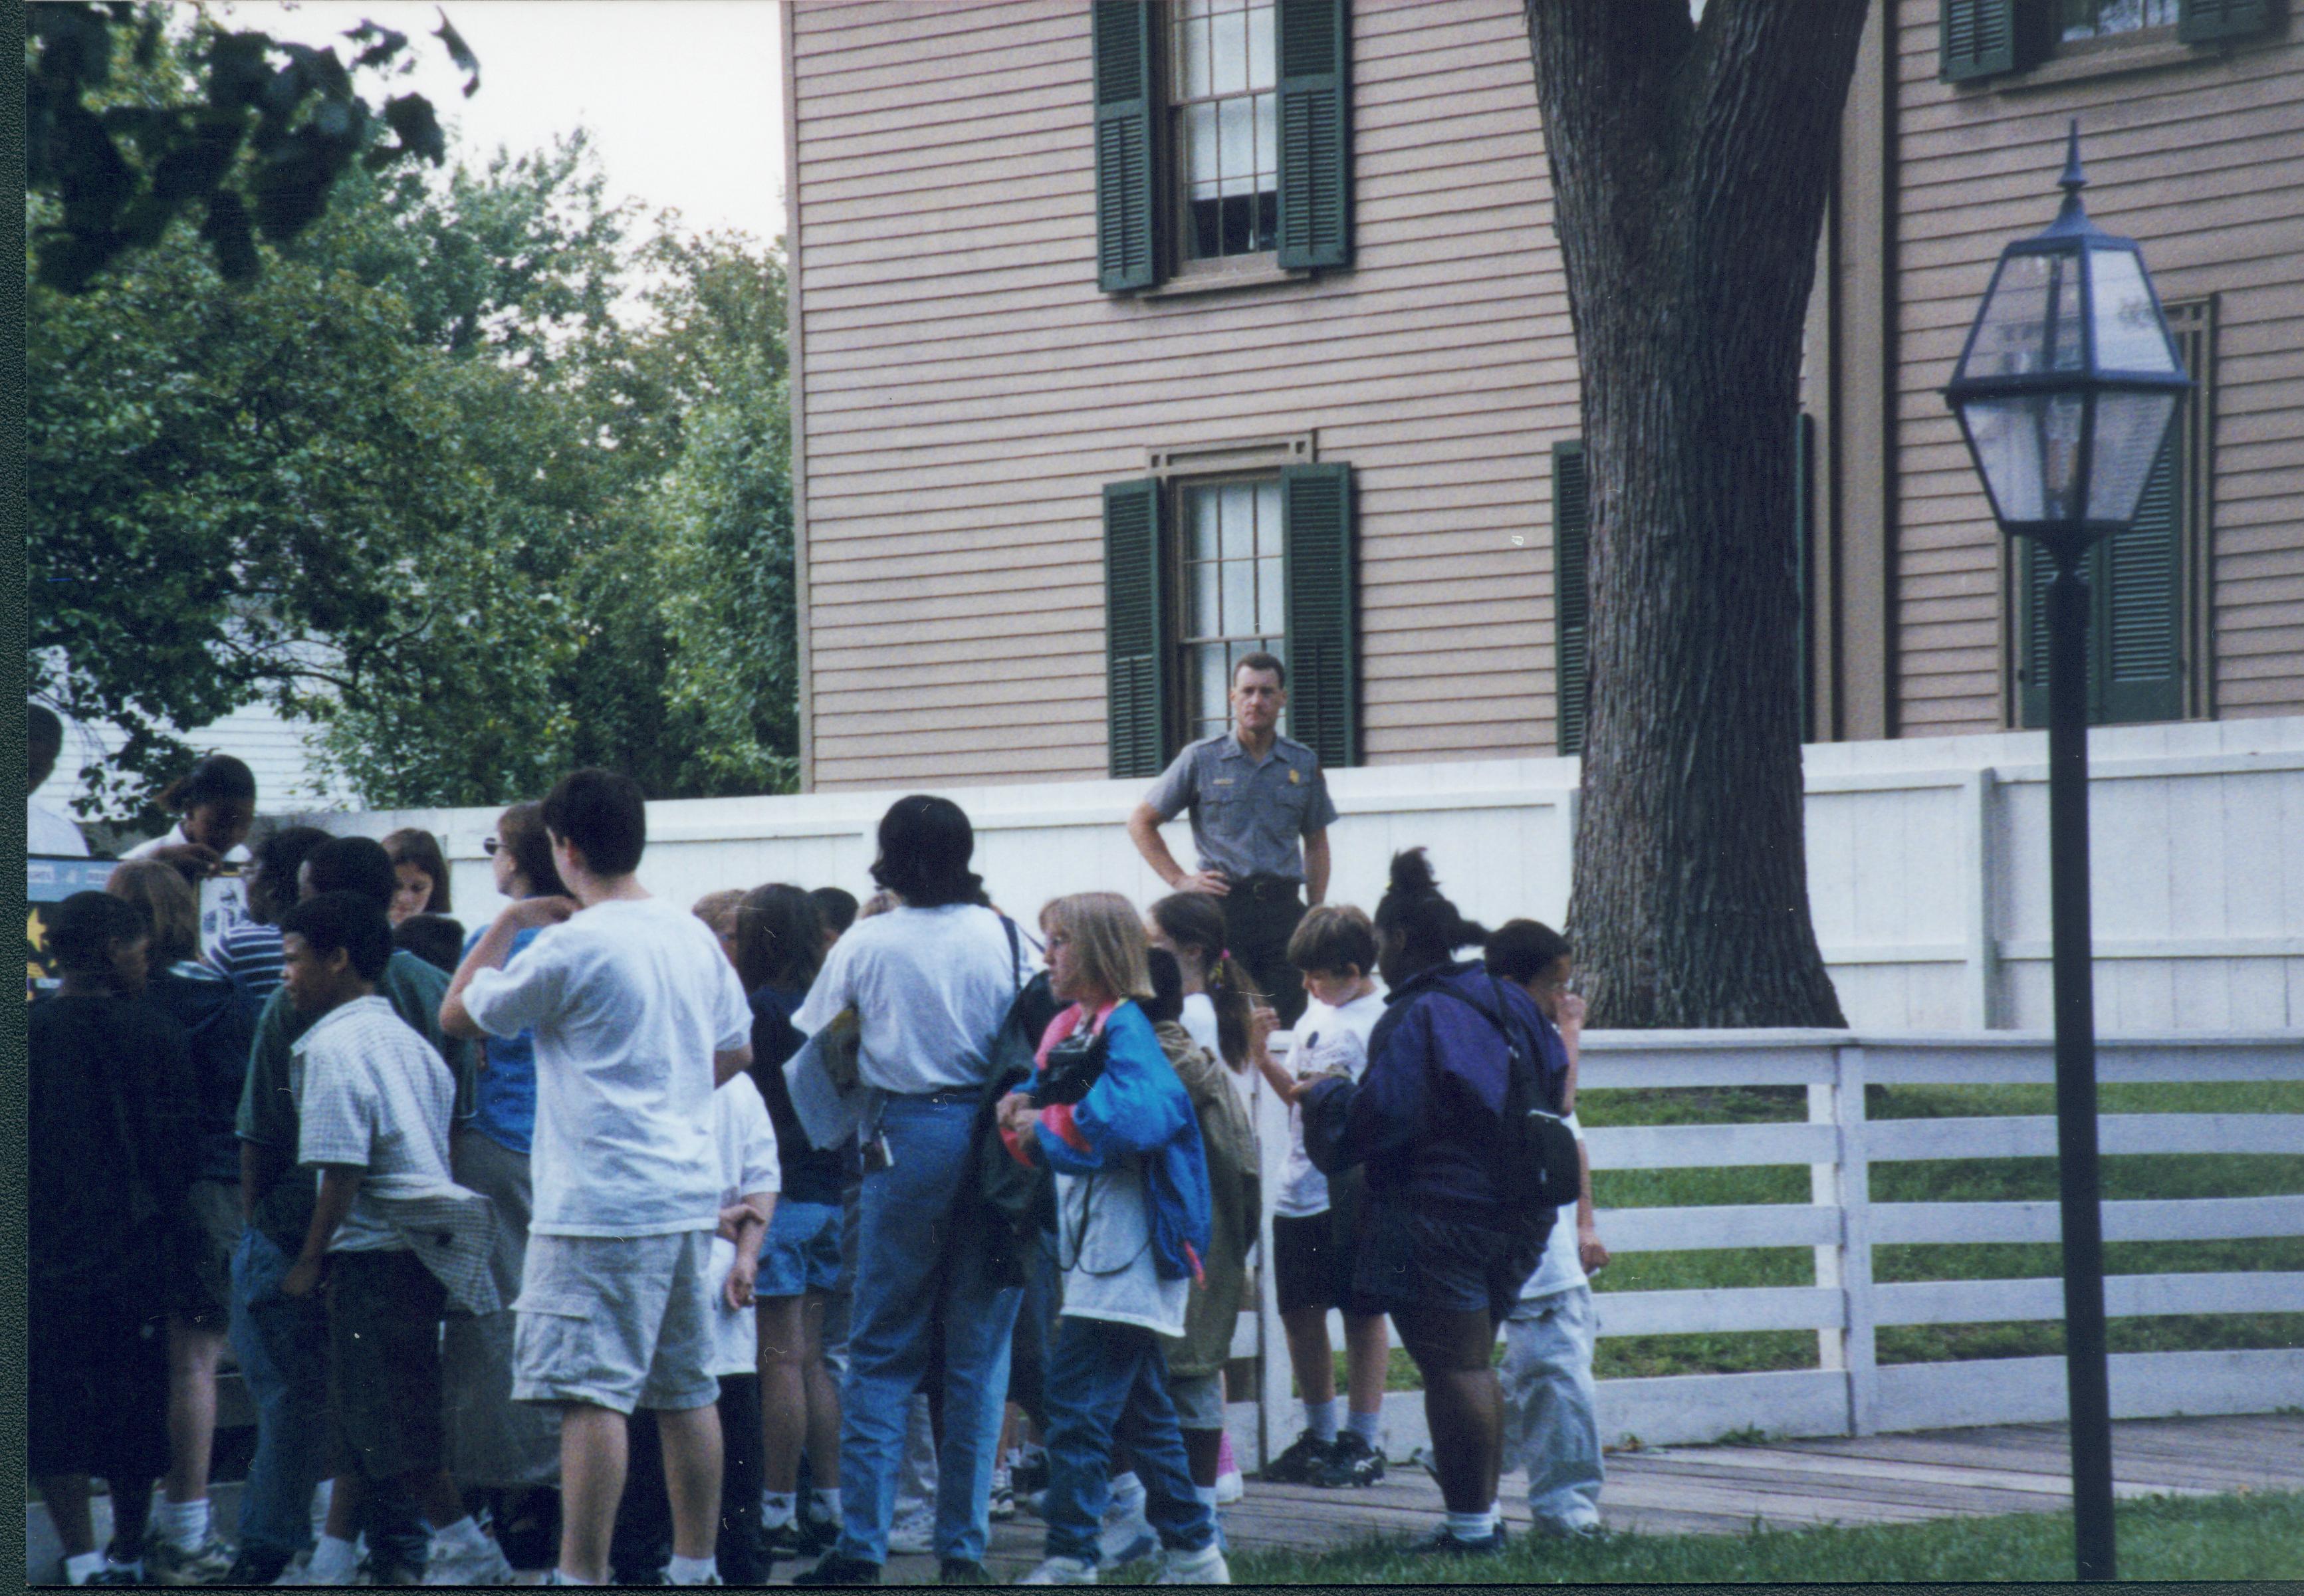 Iles School Living History program - Historian Tim Townsend surveys the crowd watching the Women's Rights performance in the Carrigan lot (Block 10, Lot 6-7).  Lincoln Home in background. Looking Southeast from 8th Street Iles School, living history, staff, students, school groups, Lincoln Home